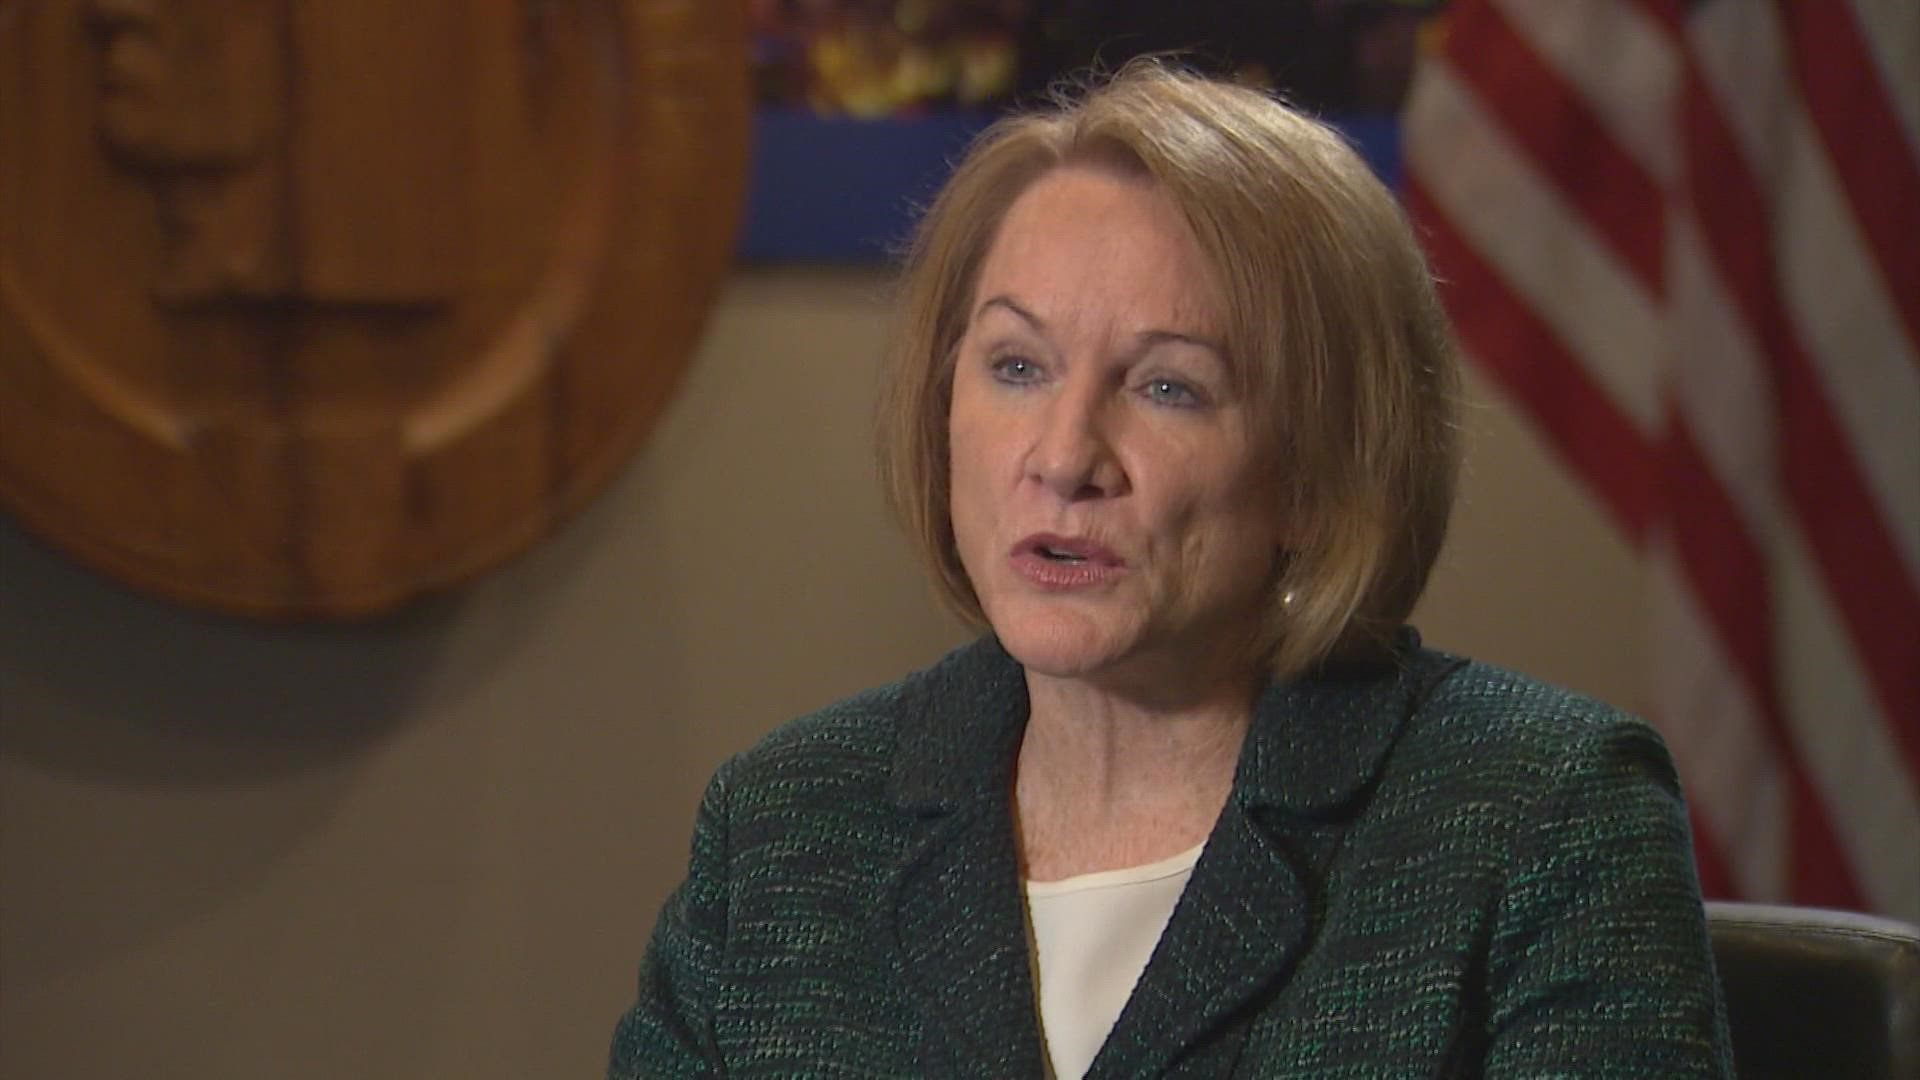 Prosecutors did not find criminal intent to destroy public records against former Mayor Jenny Durkan, former Police Chief Carmen Best and Fire Chief Harold Scoggins.